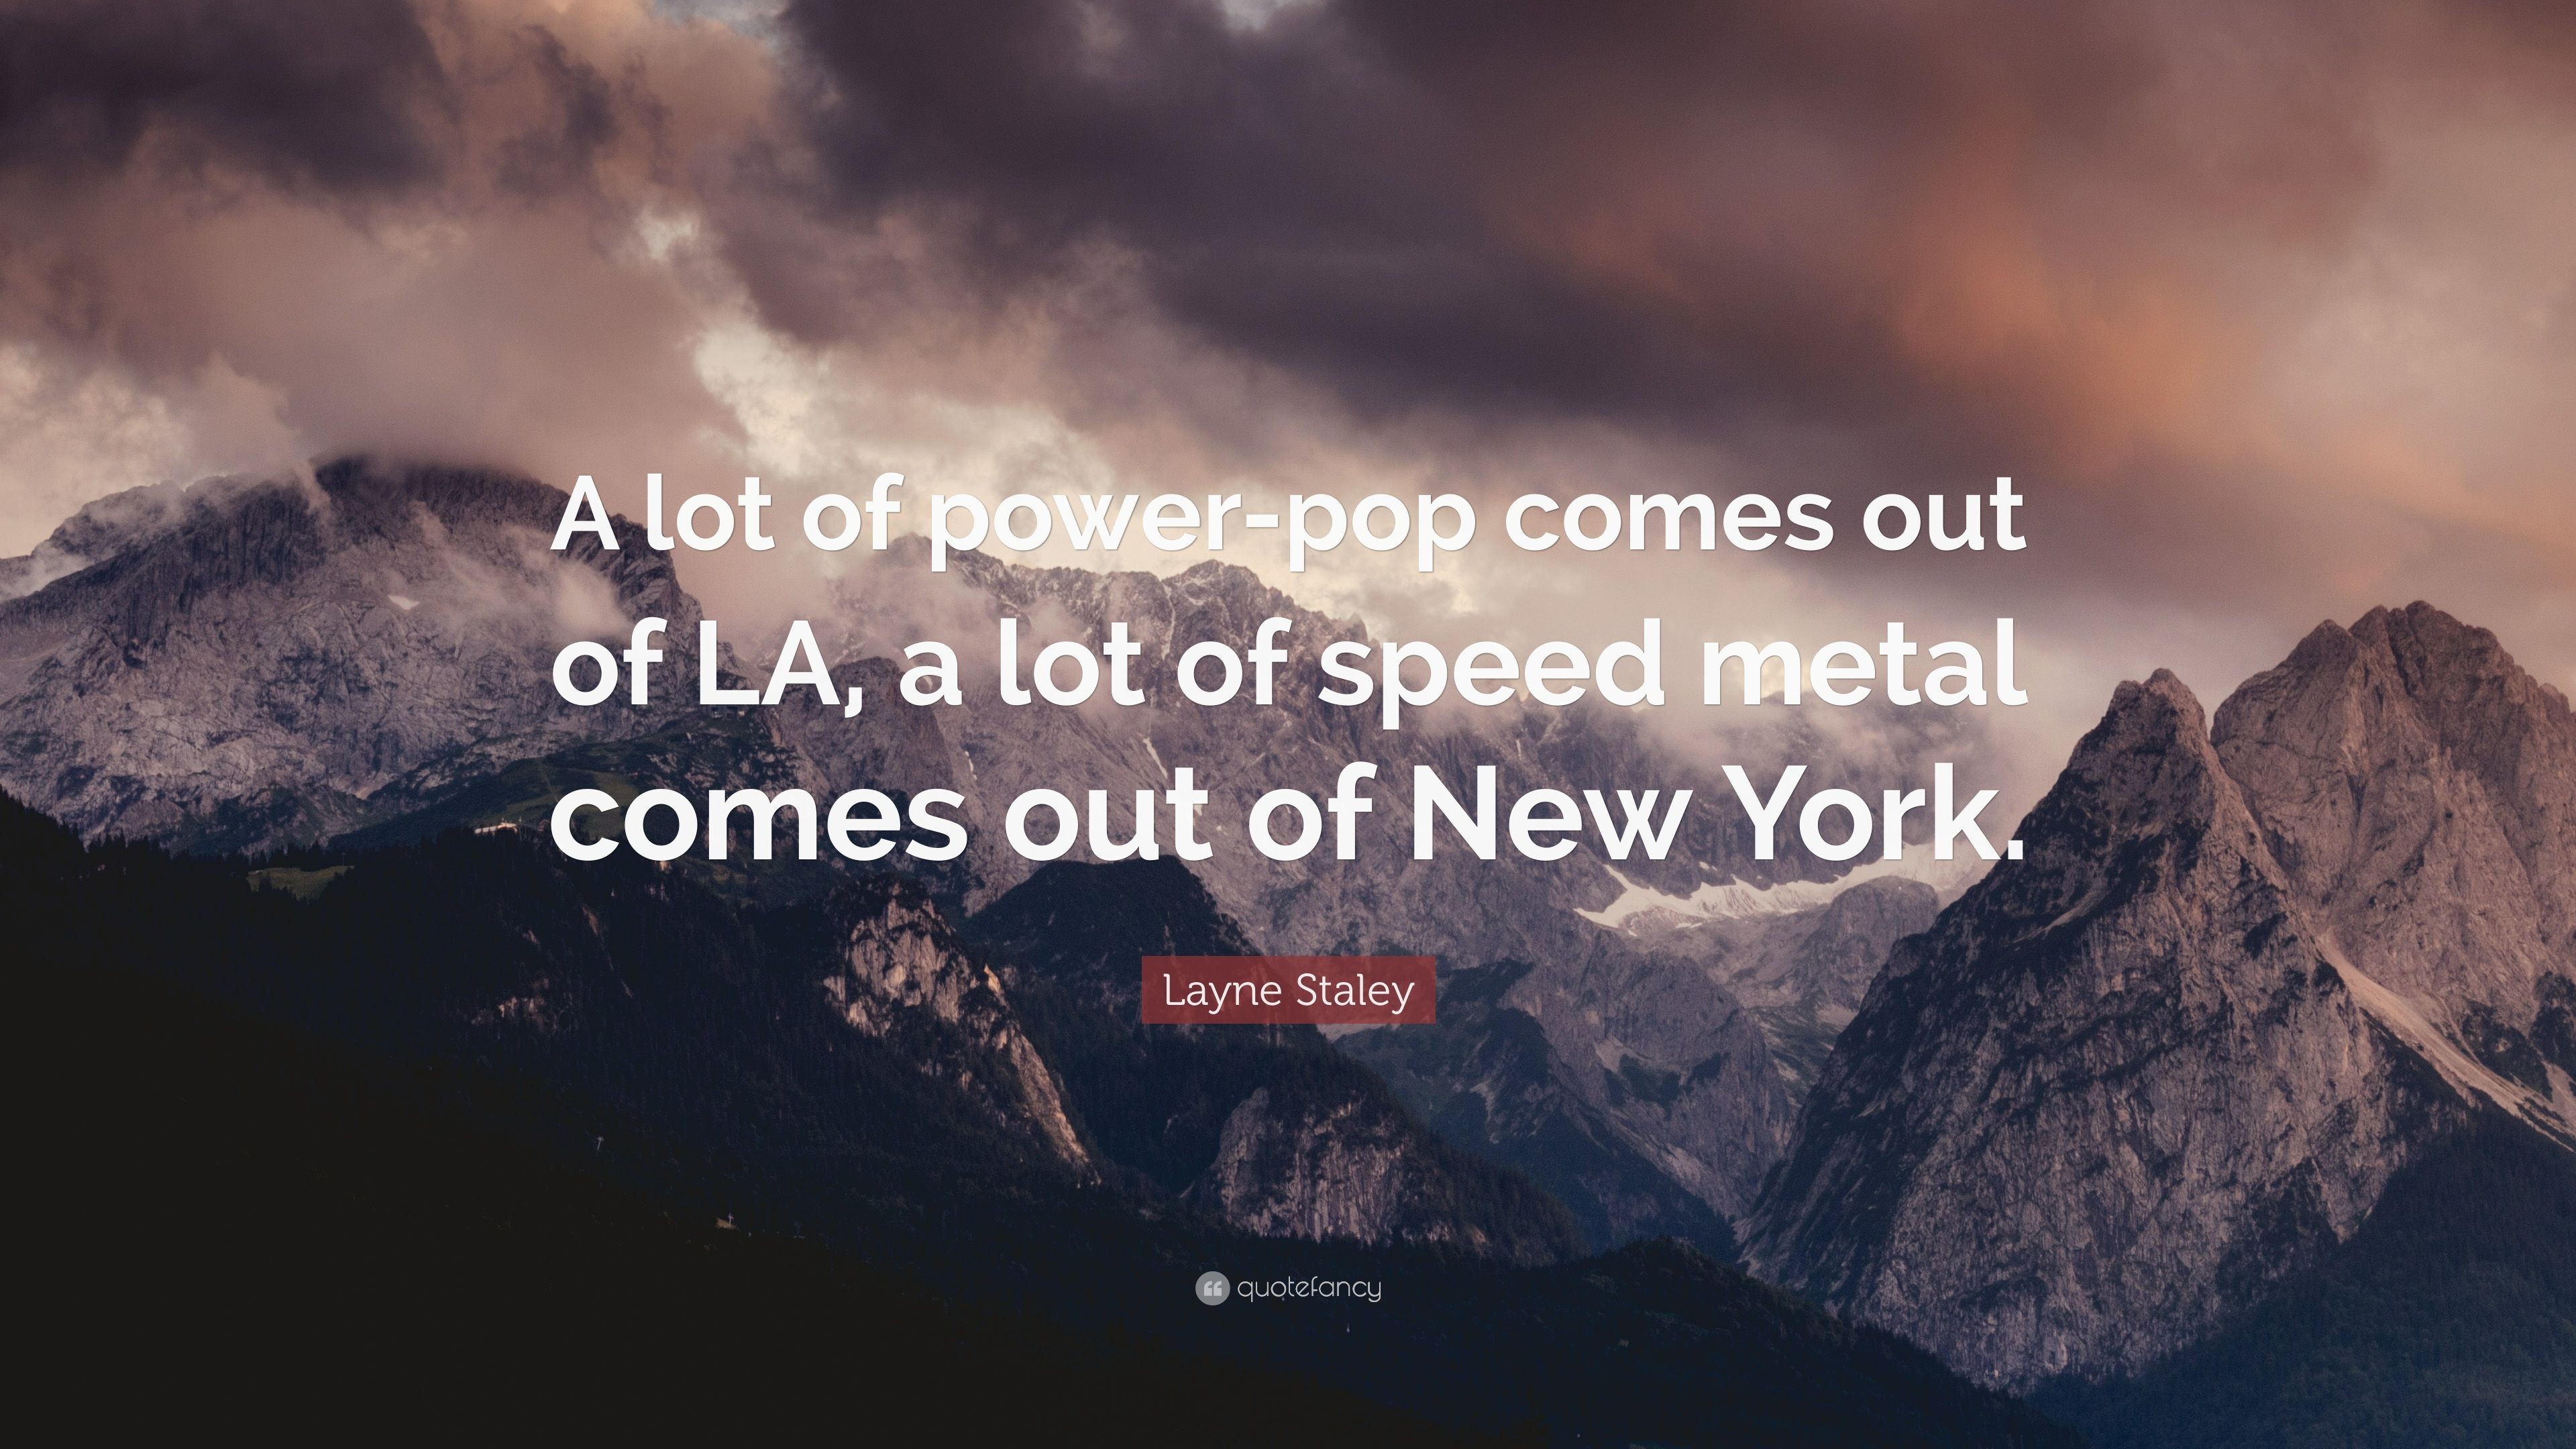 3840x2160 Layne Staley Quote: “A lot of power-pop comes out of LA,